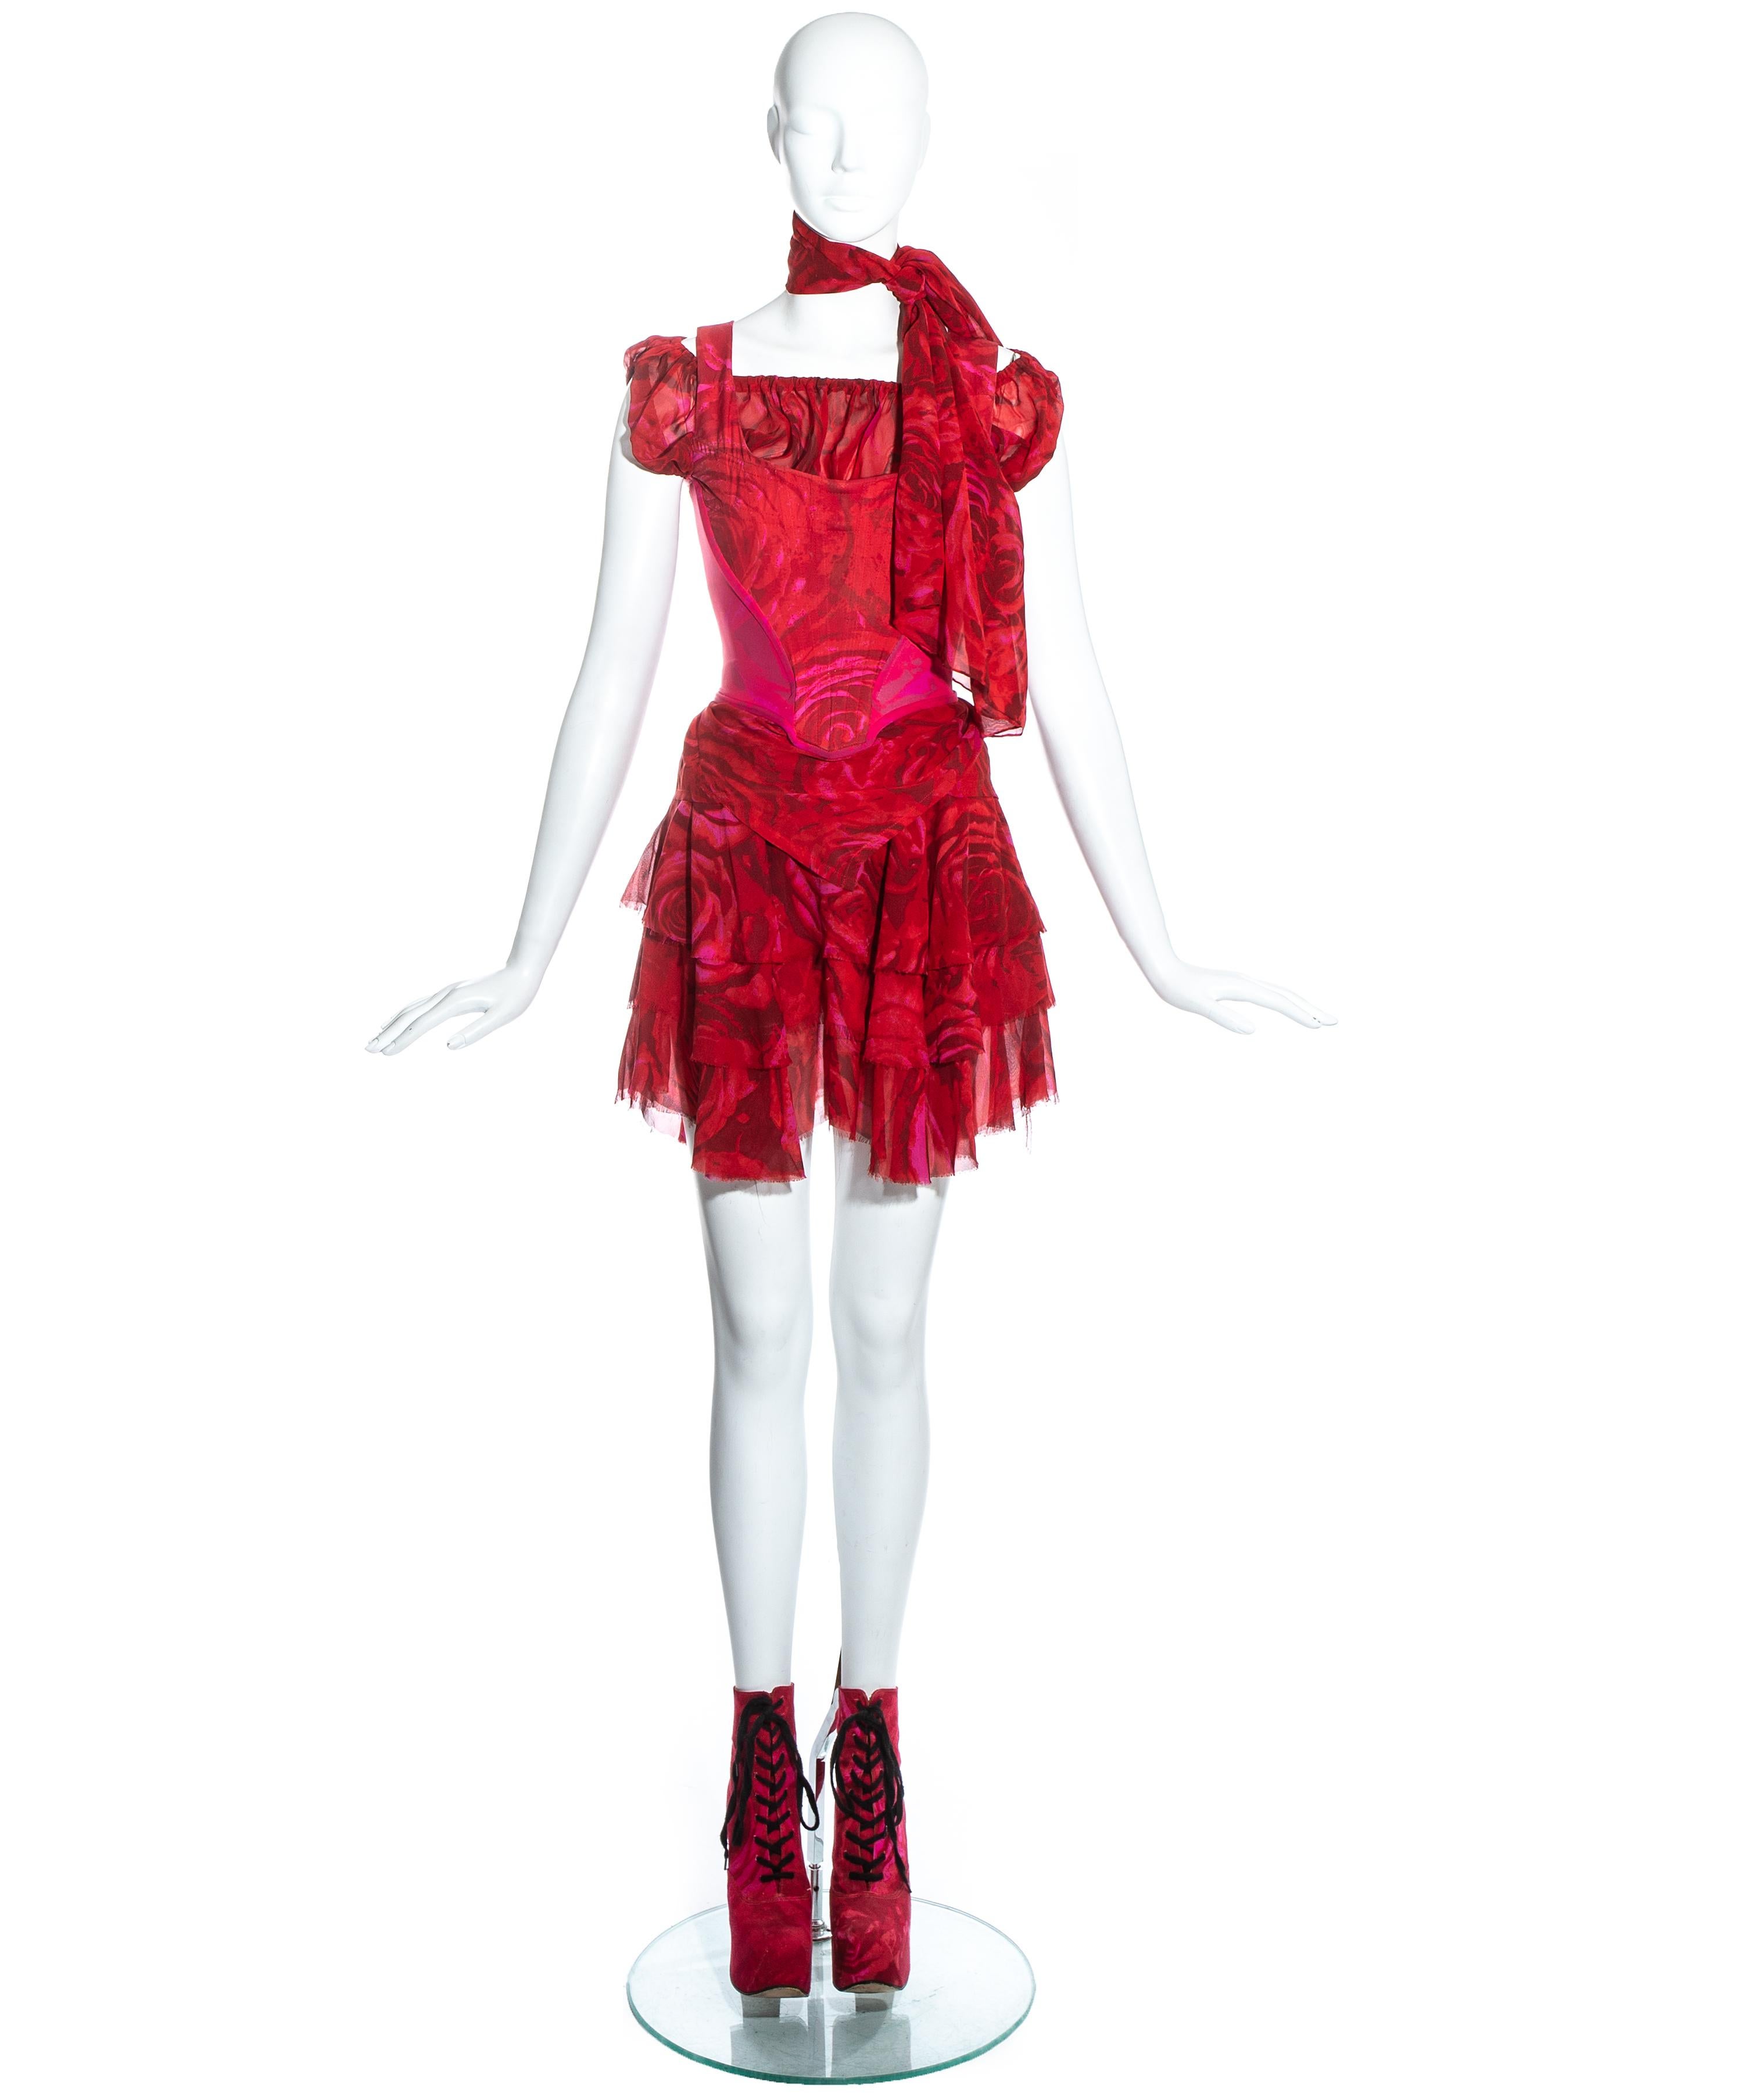 Vivienne Westwood red rose print 4 piece ensemble. Includes elevated cotton lace up platform boots (UK 6 - EU 39), layered chiffon mini skirt, chiffon blouse with elastic collar, corset with internal boning, and chiffon neck scarf. 

Spring-Summer